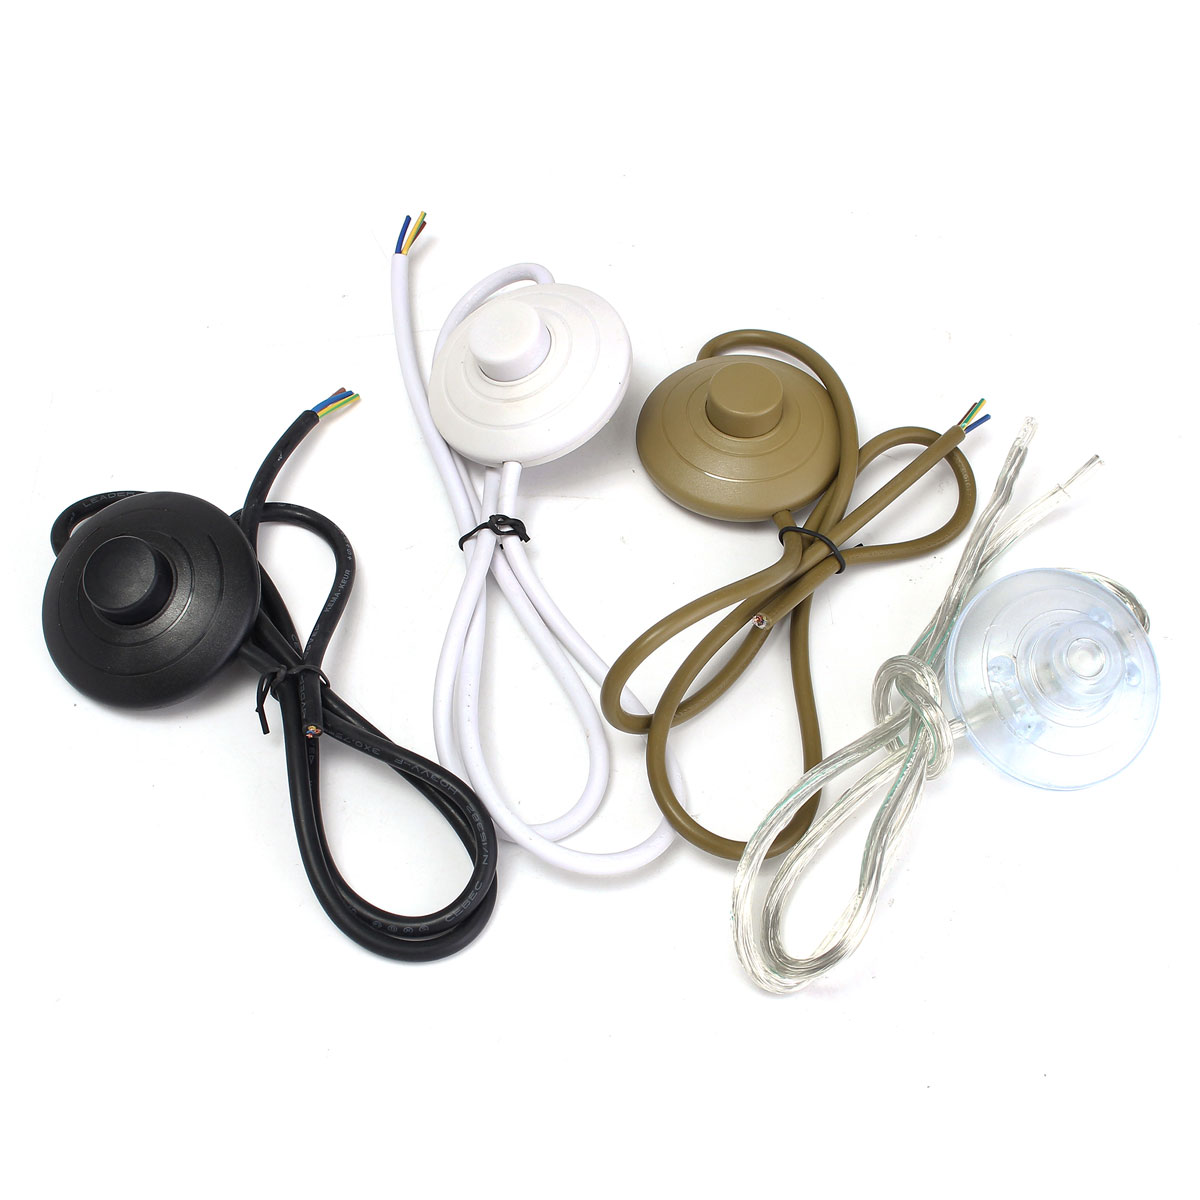 1M-Circular-Lighting-Button-Switch-with-3-Core-Inline-Flex-Cord-for-Table-Desk-Lamp-1271121-1